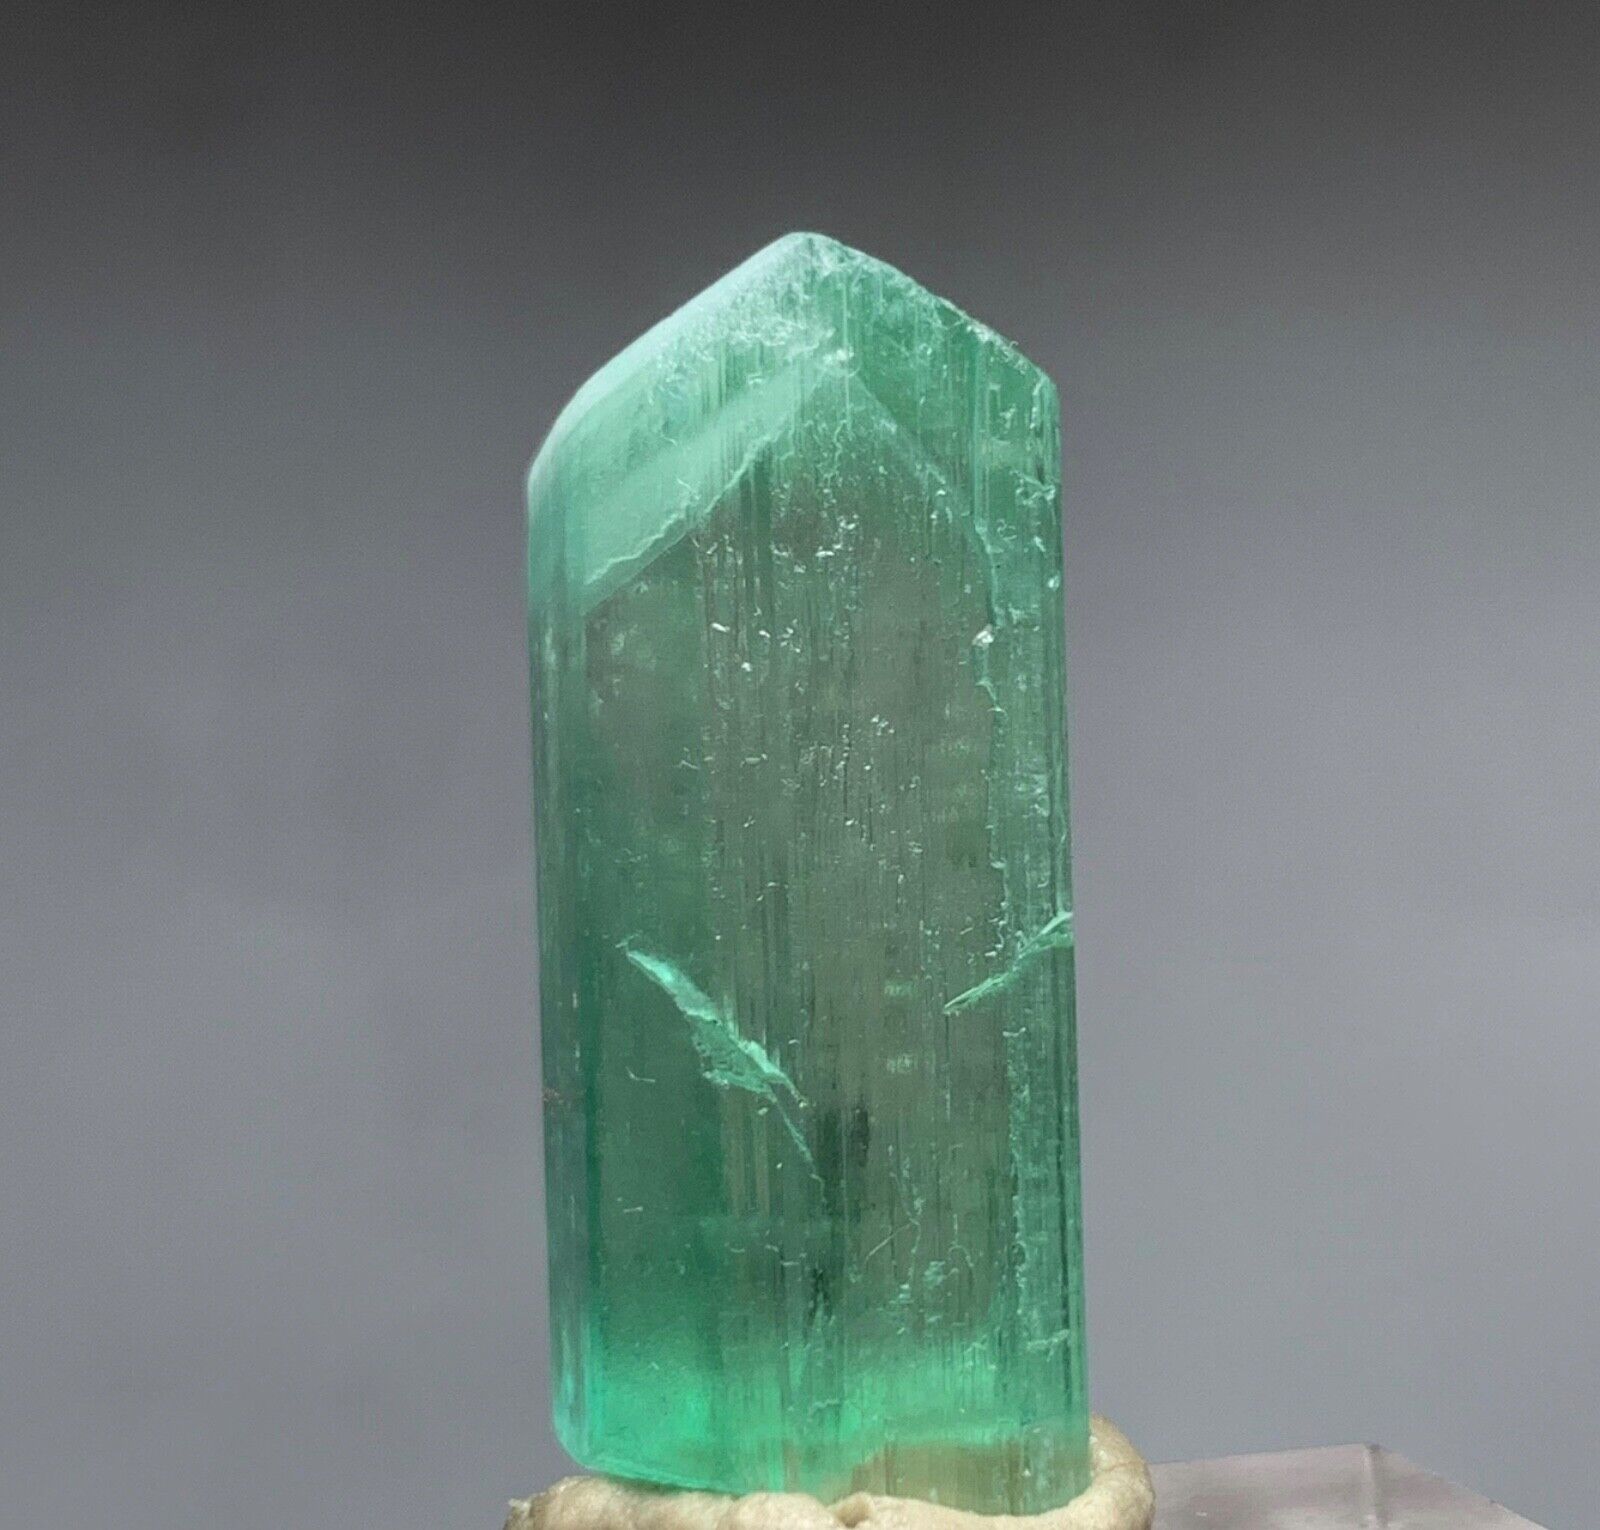 61 CTS Top Quality Green Kunzite Crystal From Afghanistan